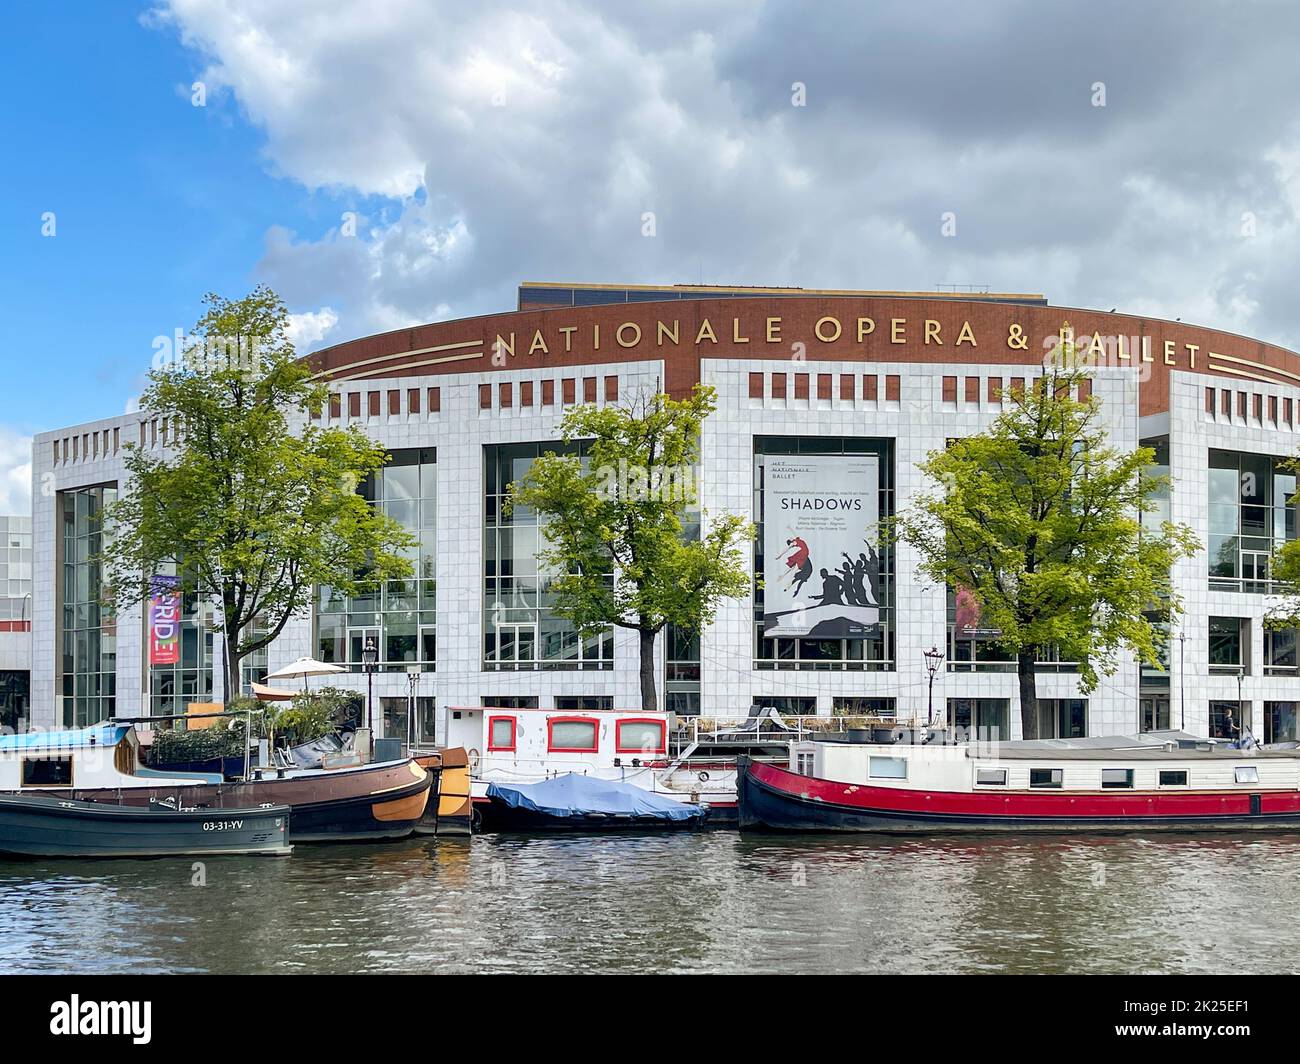 Amsterdam, Netherlands - August 2022: Glass topped tourist sightseeing canal boat cruising on one of the city's centre Stock Photo